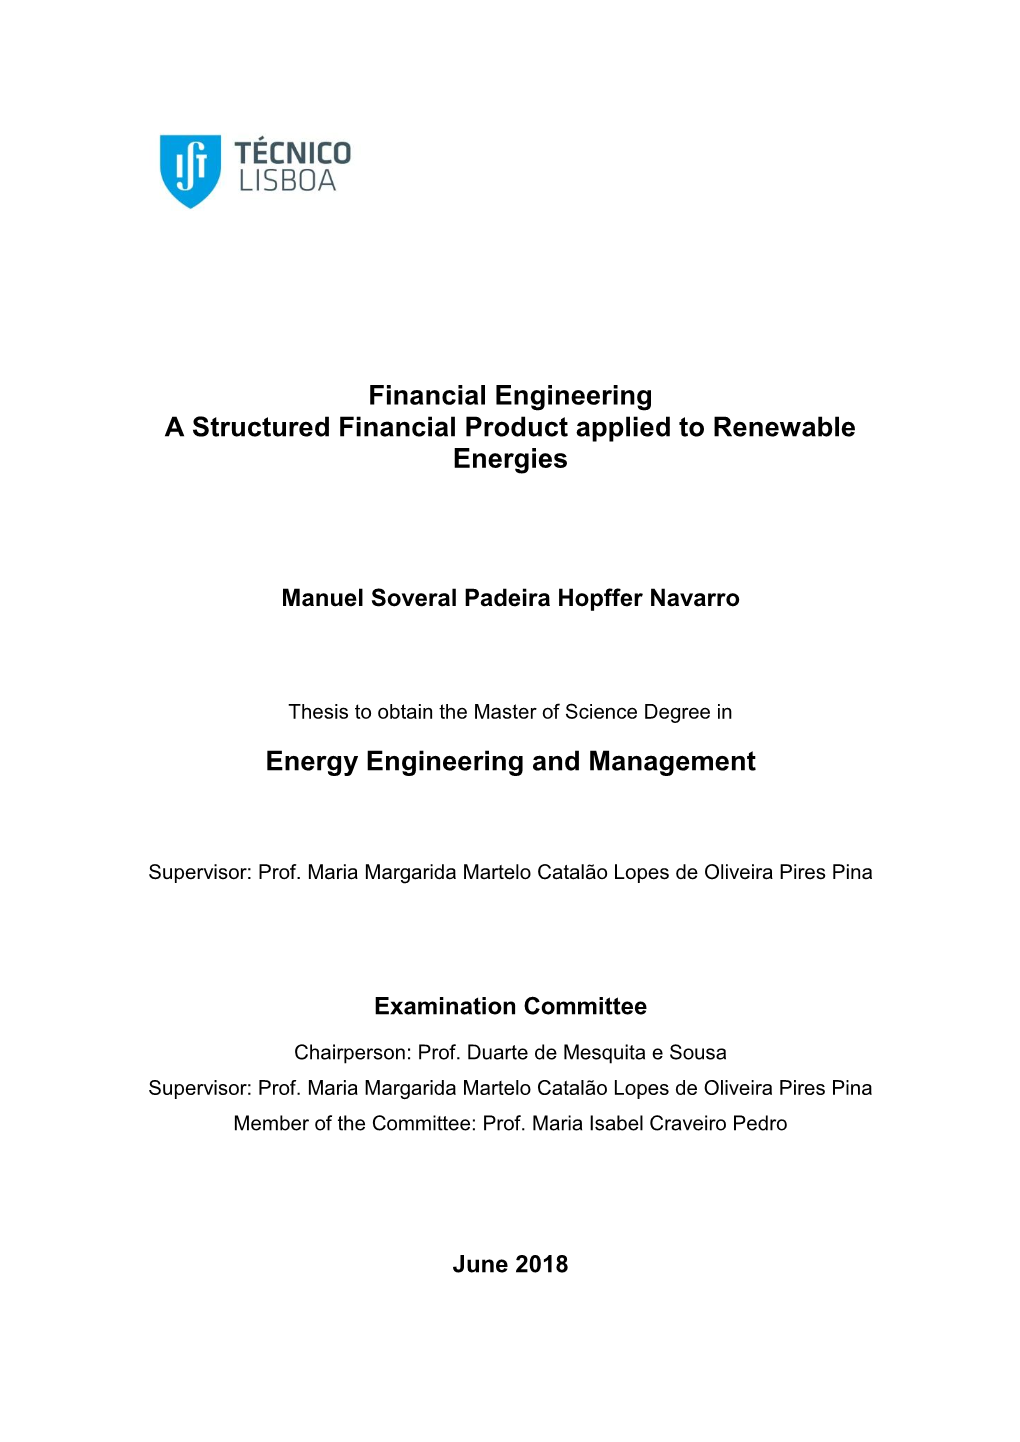 Financial Engineering a Structured Financial Product Applied to Renewable Energies